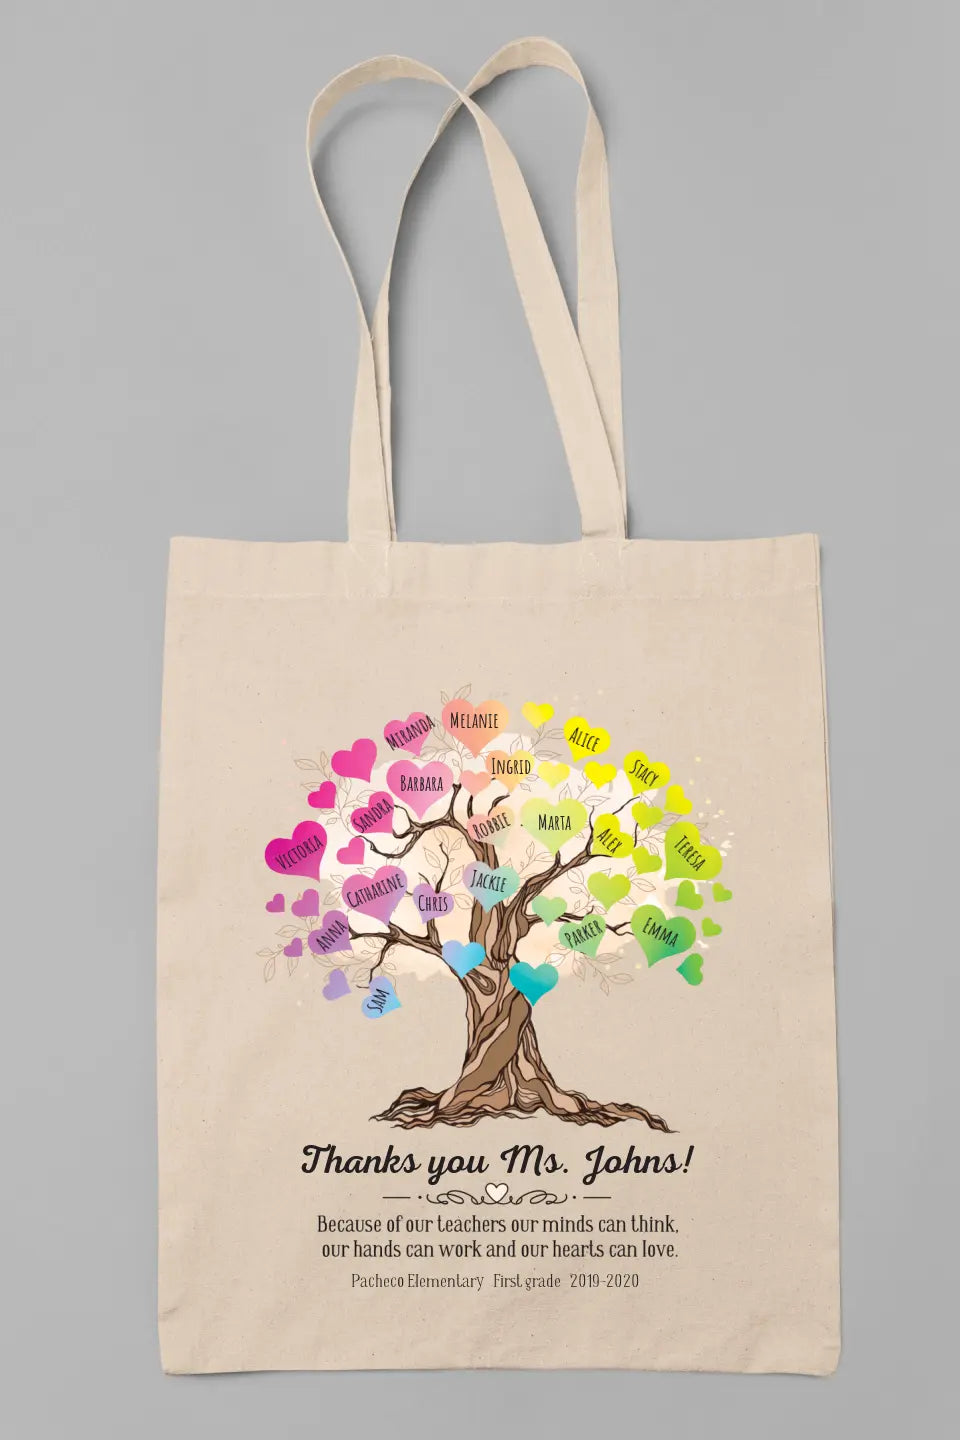 Personalized Gift For Teacher's Day - T-Shirt